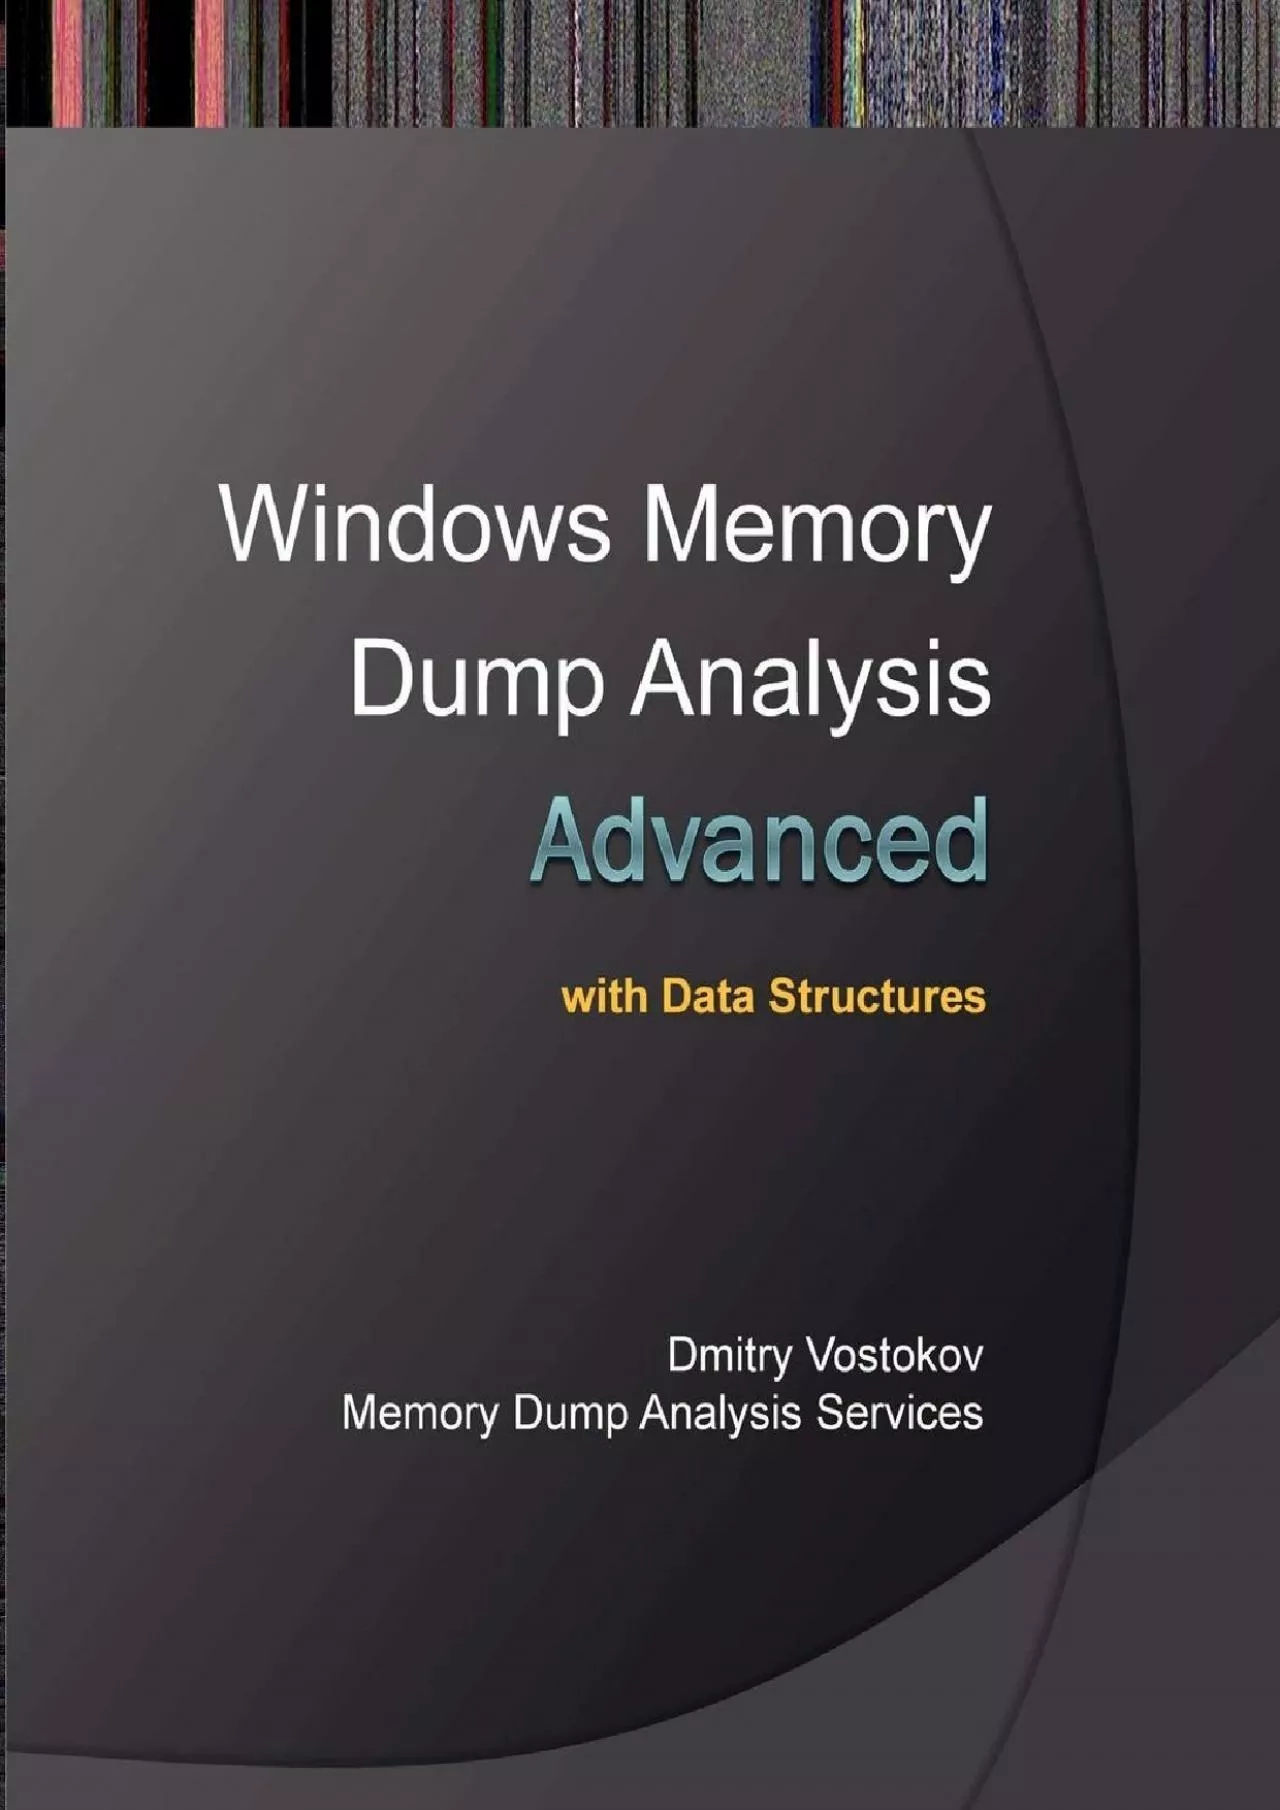 [DOWLOAD]-Advanced Windows Memory Dump Analysis with Data Structures: Training Course